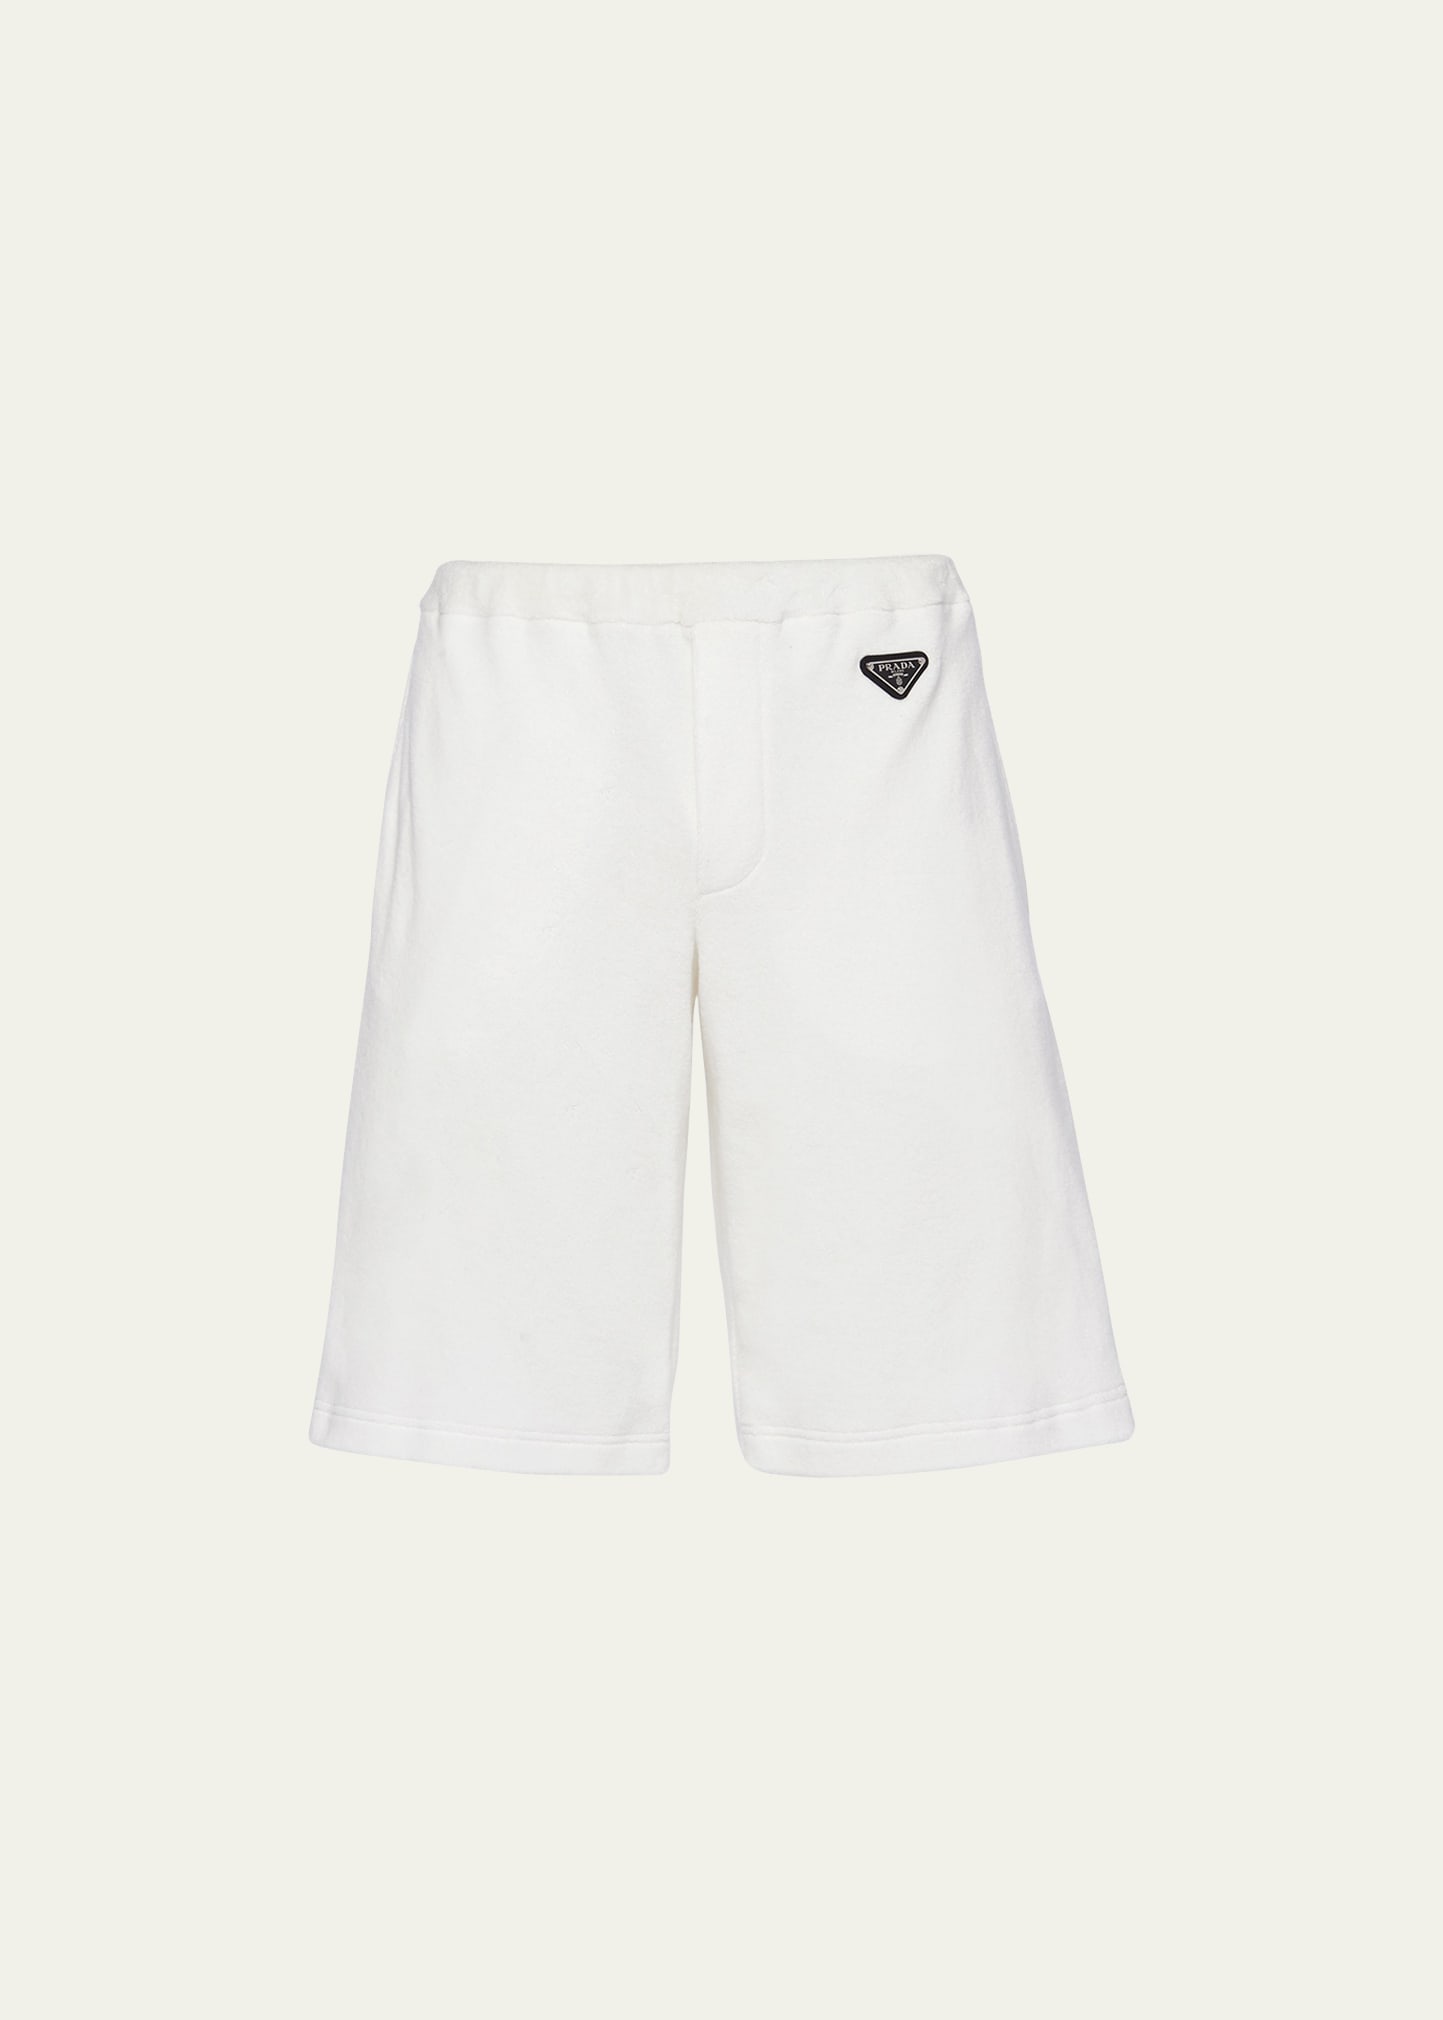 Men's Terry Shorts with Triangle Logo